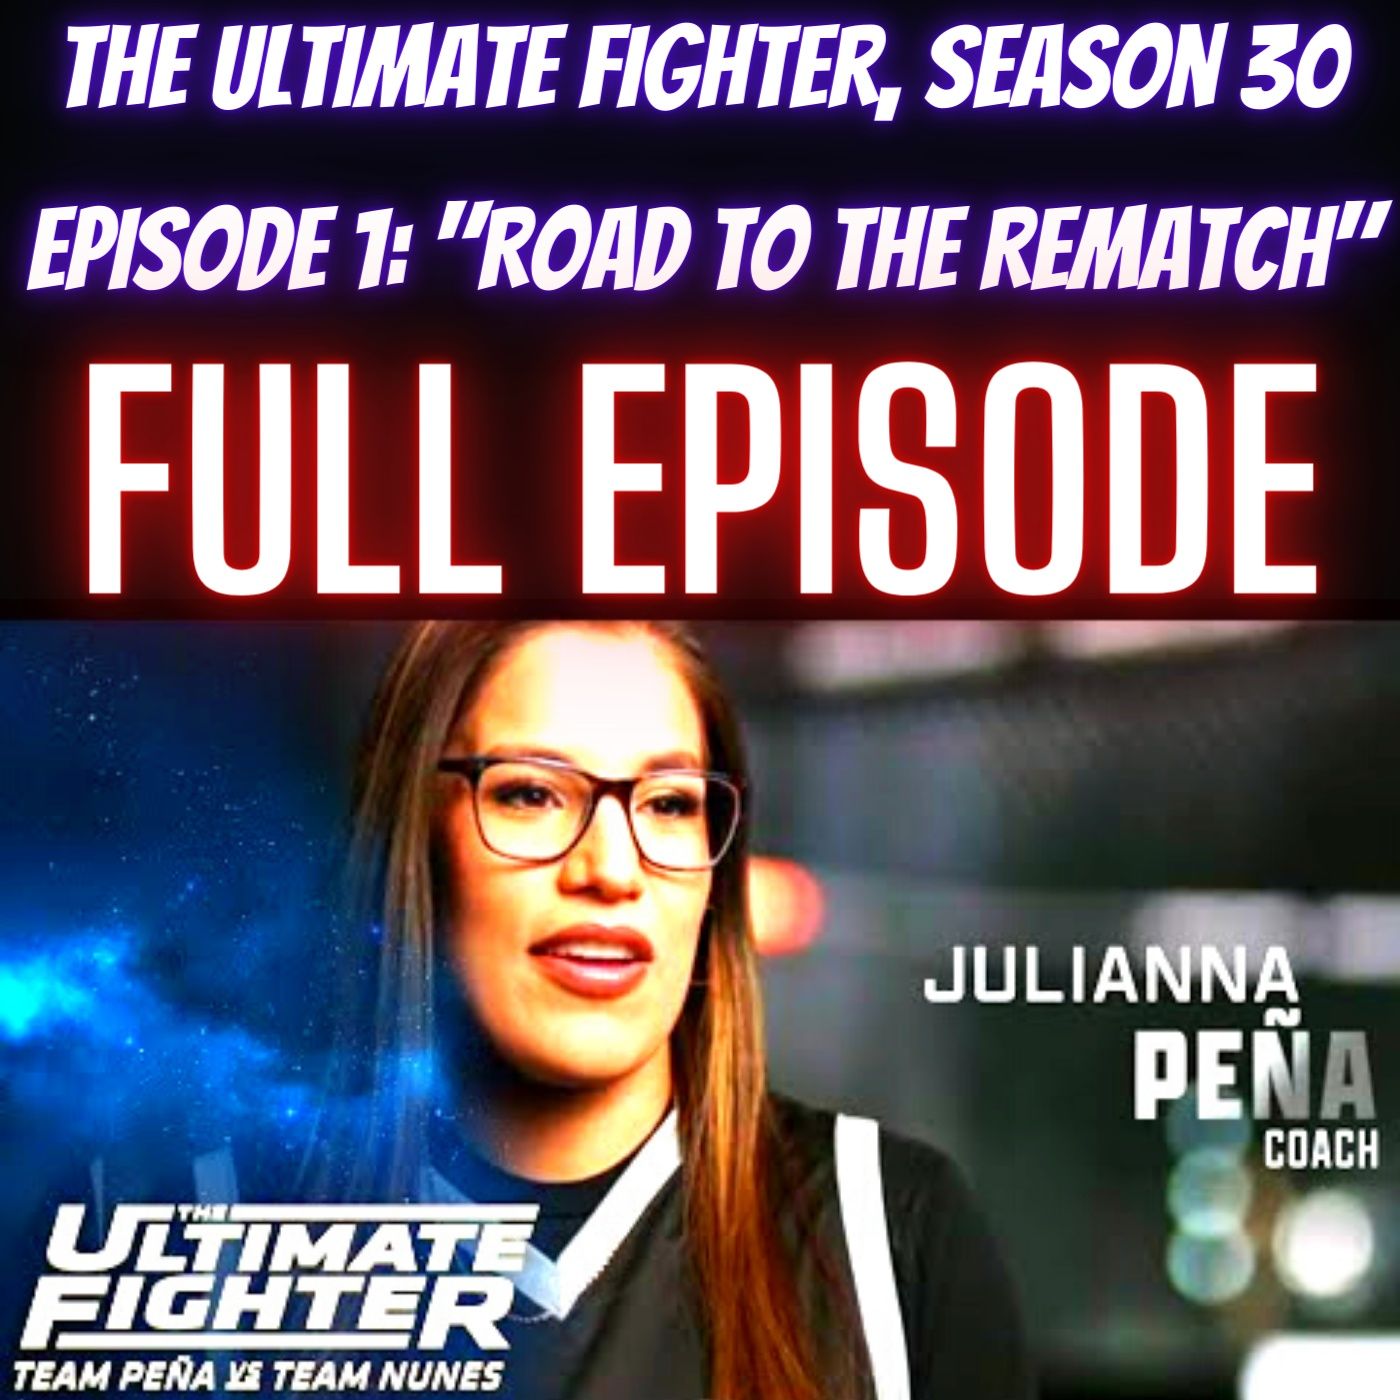 The Ultimate Fighter, Season 30 Episode 1: "Road to the Rematch" FULL EPISODE - May 03, 2022